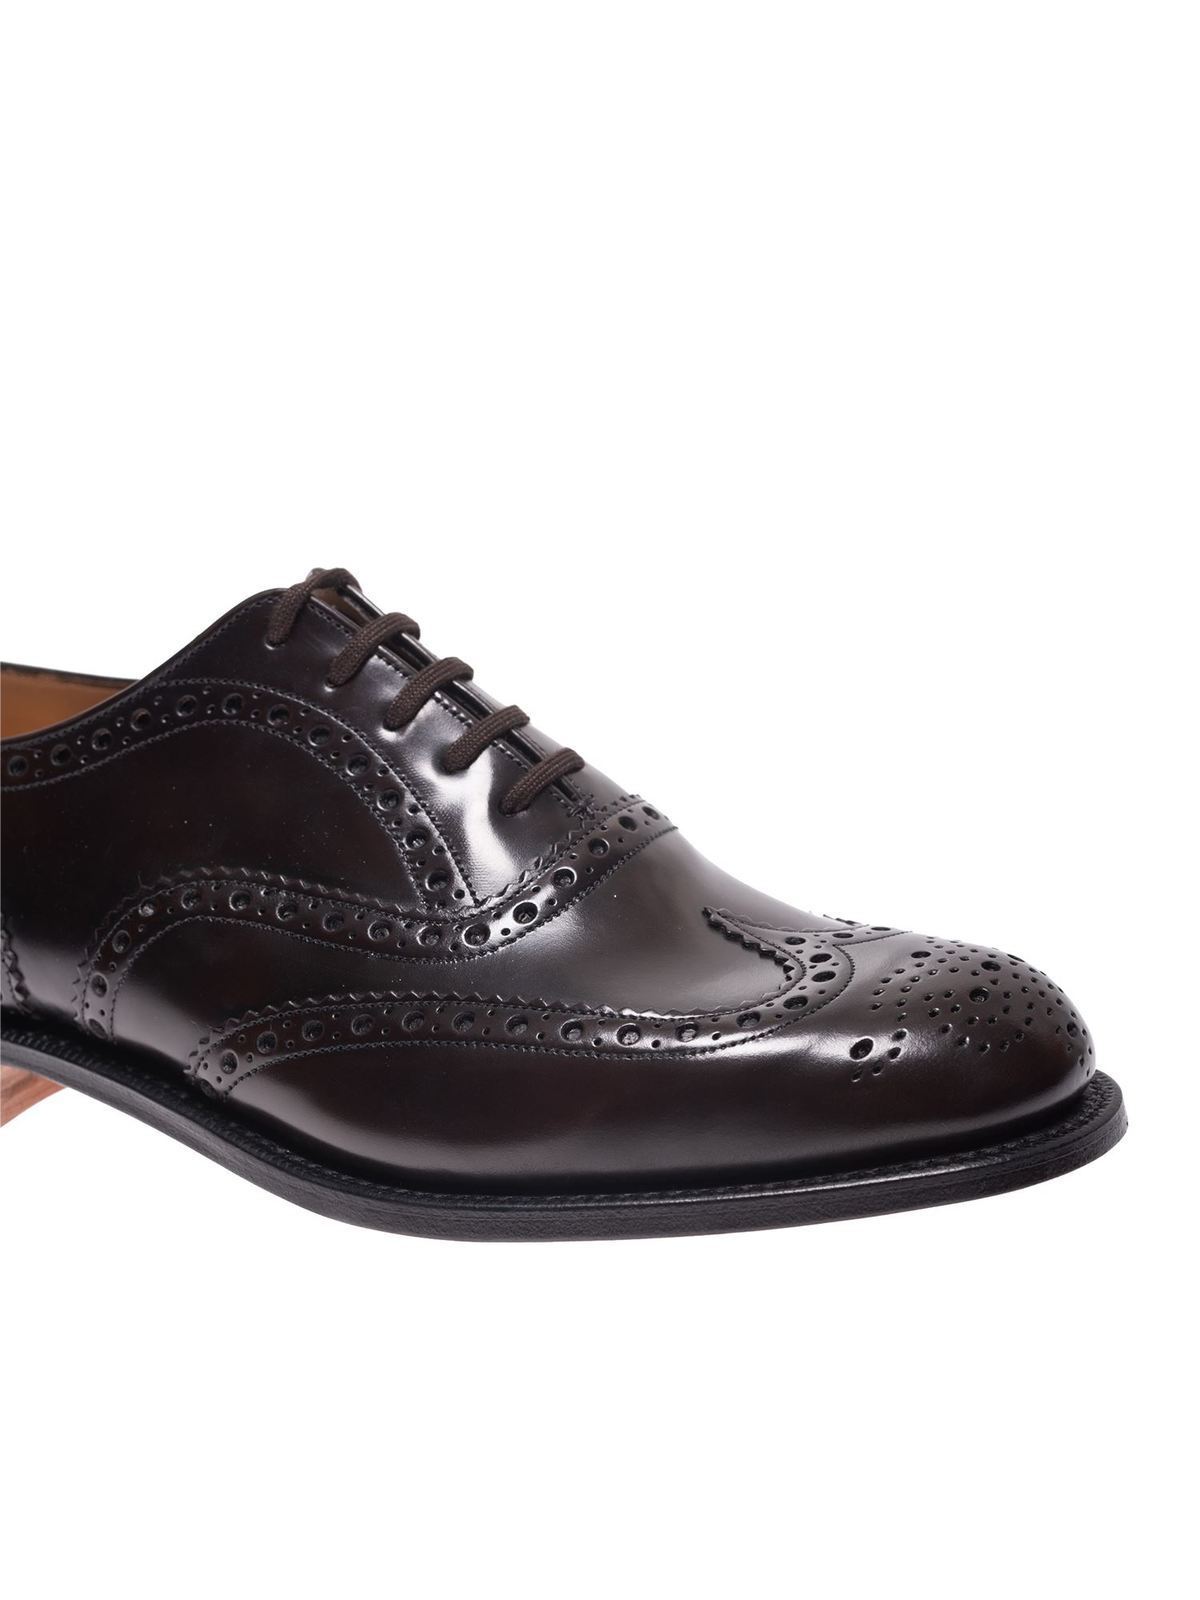 Classic shoes Church's - Burwood shaded leather Oxford shoes - 734048